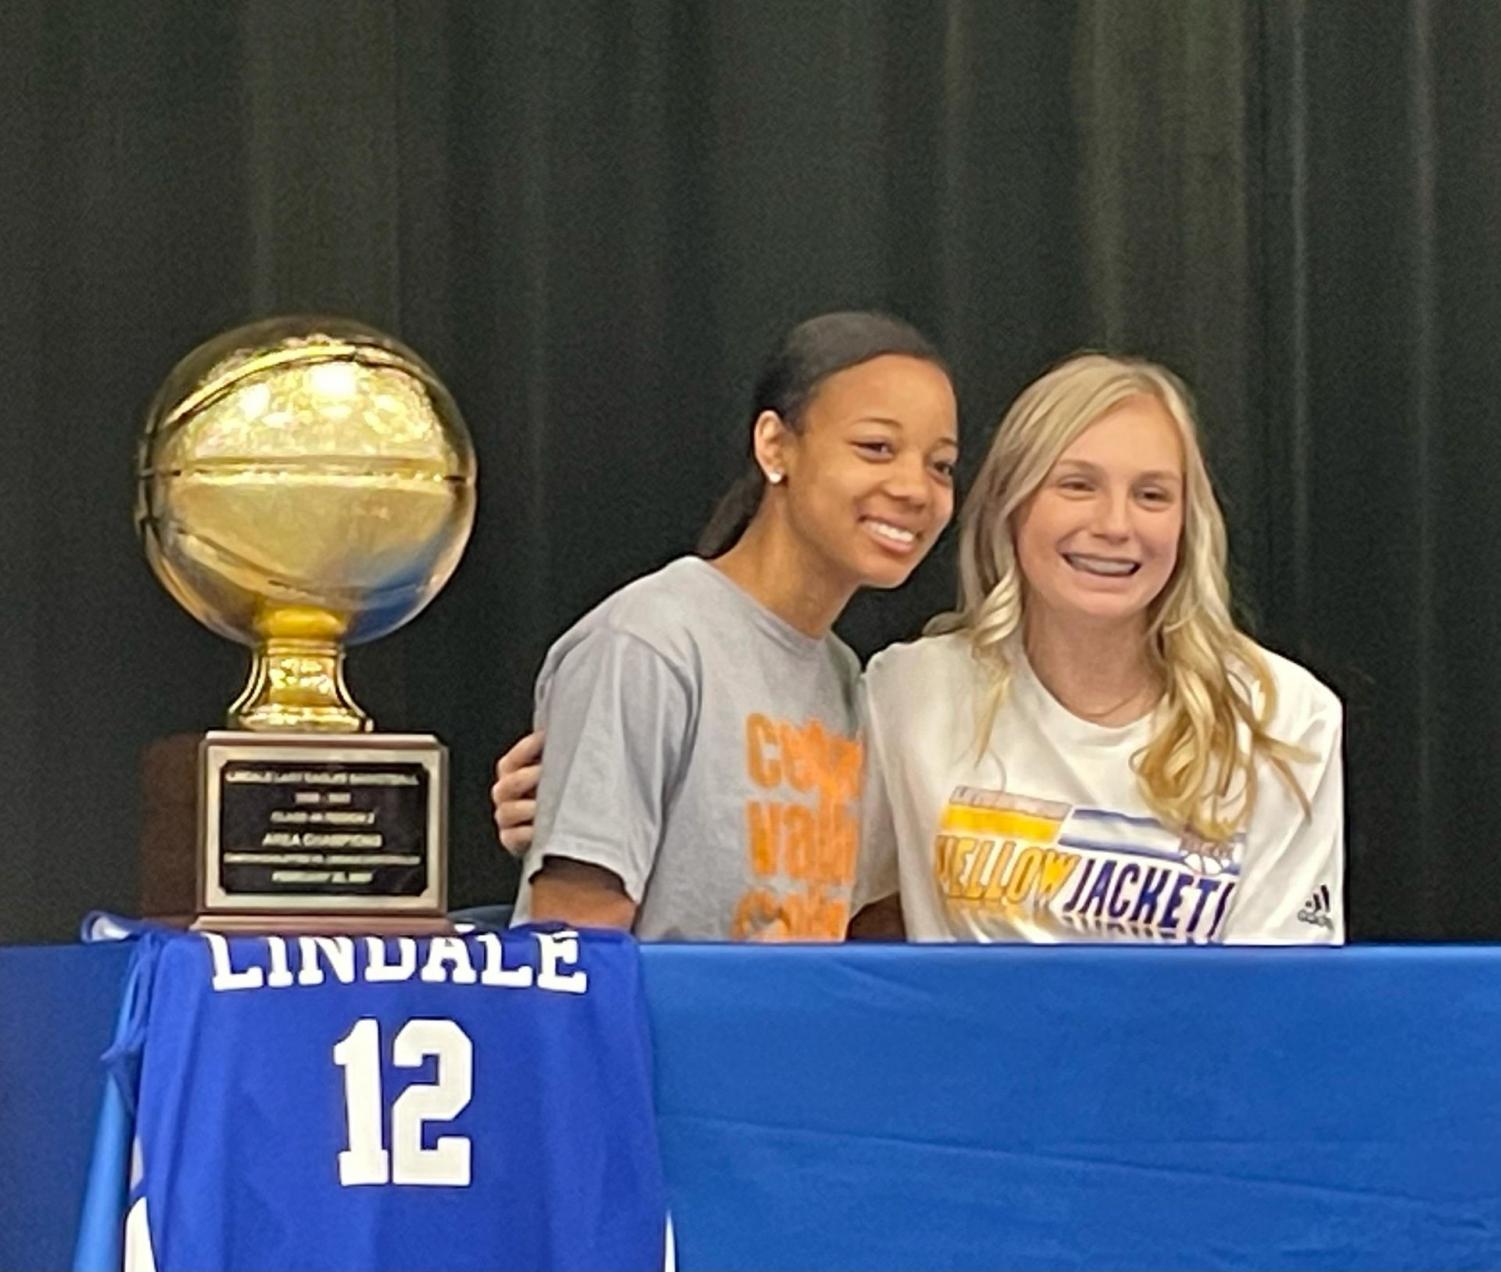 Seniors Lily Chamberlain and Kalaya Pierce signed to play sports at the college level on April 22. Pierce signed to play volleyball at Cedar Valley College and Chamberlain will play basketball at LeTourneau University.
“I am very excited for both of these young ladies to have the opportunity to go compete at the next level,” basketball coach Daniel Devisscher said. “Going to college to play sports is not easy as very few are chosen, they understand what it takes and are willing to put the work in to be great.”
The two girls played together on the basketball team reaching a regional quarterfinals title in the playoffs. Chamberlain, a shooting guard, will continue that legacy of basketball excellence in college at LeTourneau in Longview, Texas. 
“I chose LeTourneau because of the environment and how close it was to home,” Chamberlain said. “I just really fell in love with the coaches and my teammates in Longview.”
Pierce played for the girls varsity volleyball team last fall where the team went undefeated throughout district, competing in the playoffs. Pierce is continuing her education and volleyball career at Cedar Valley College in Lancaster, Texas.
“I chose Cedar Valley because I love the team and how truly accepting they were,” Pierce said. “They really just brought me in and made me feel like I was just at home.”
